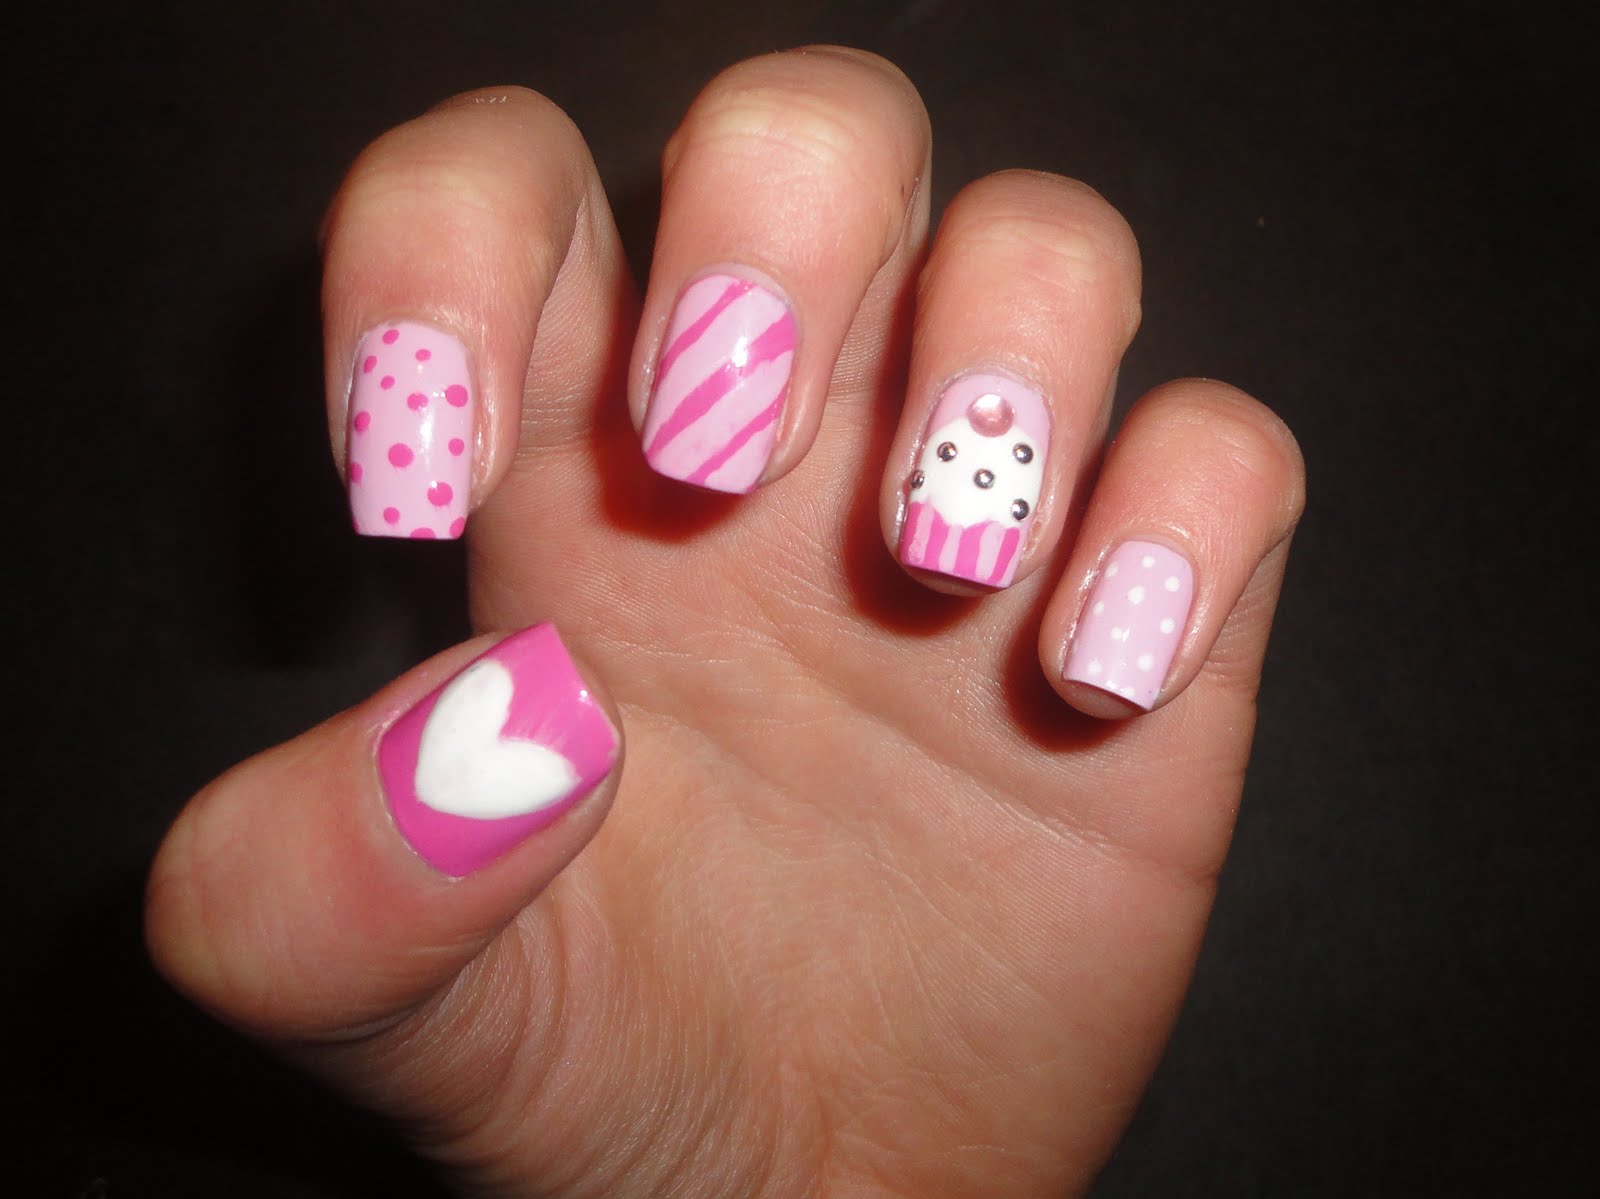 8. "Easy and Cute Nail Designs Using Only 2 Colors" - wide 2